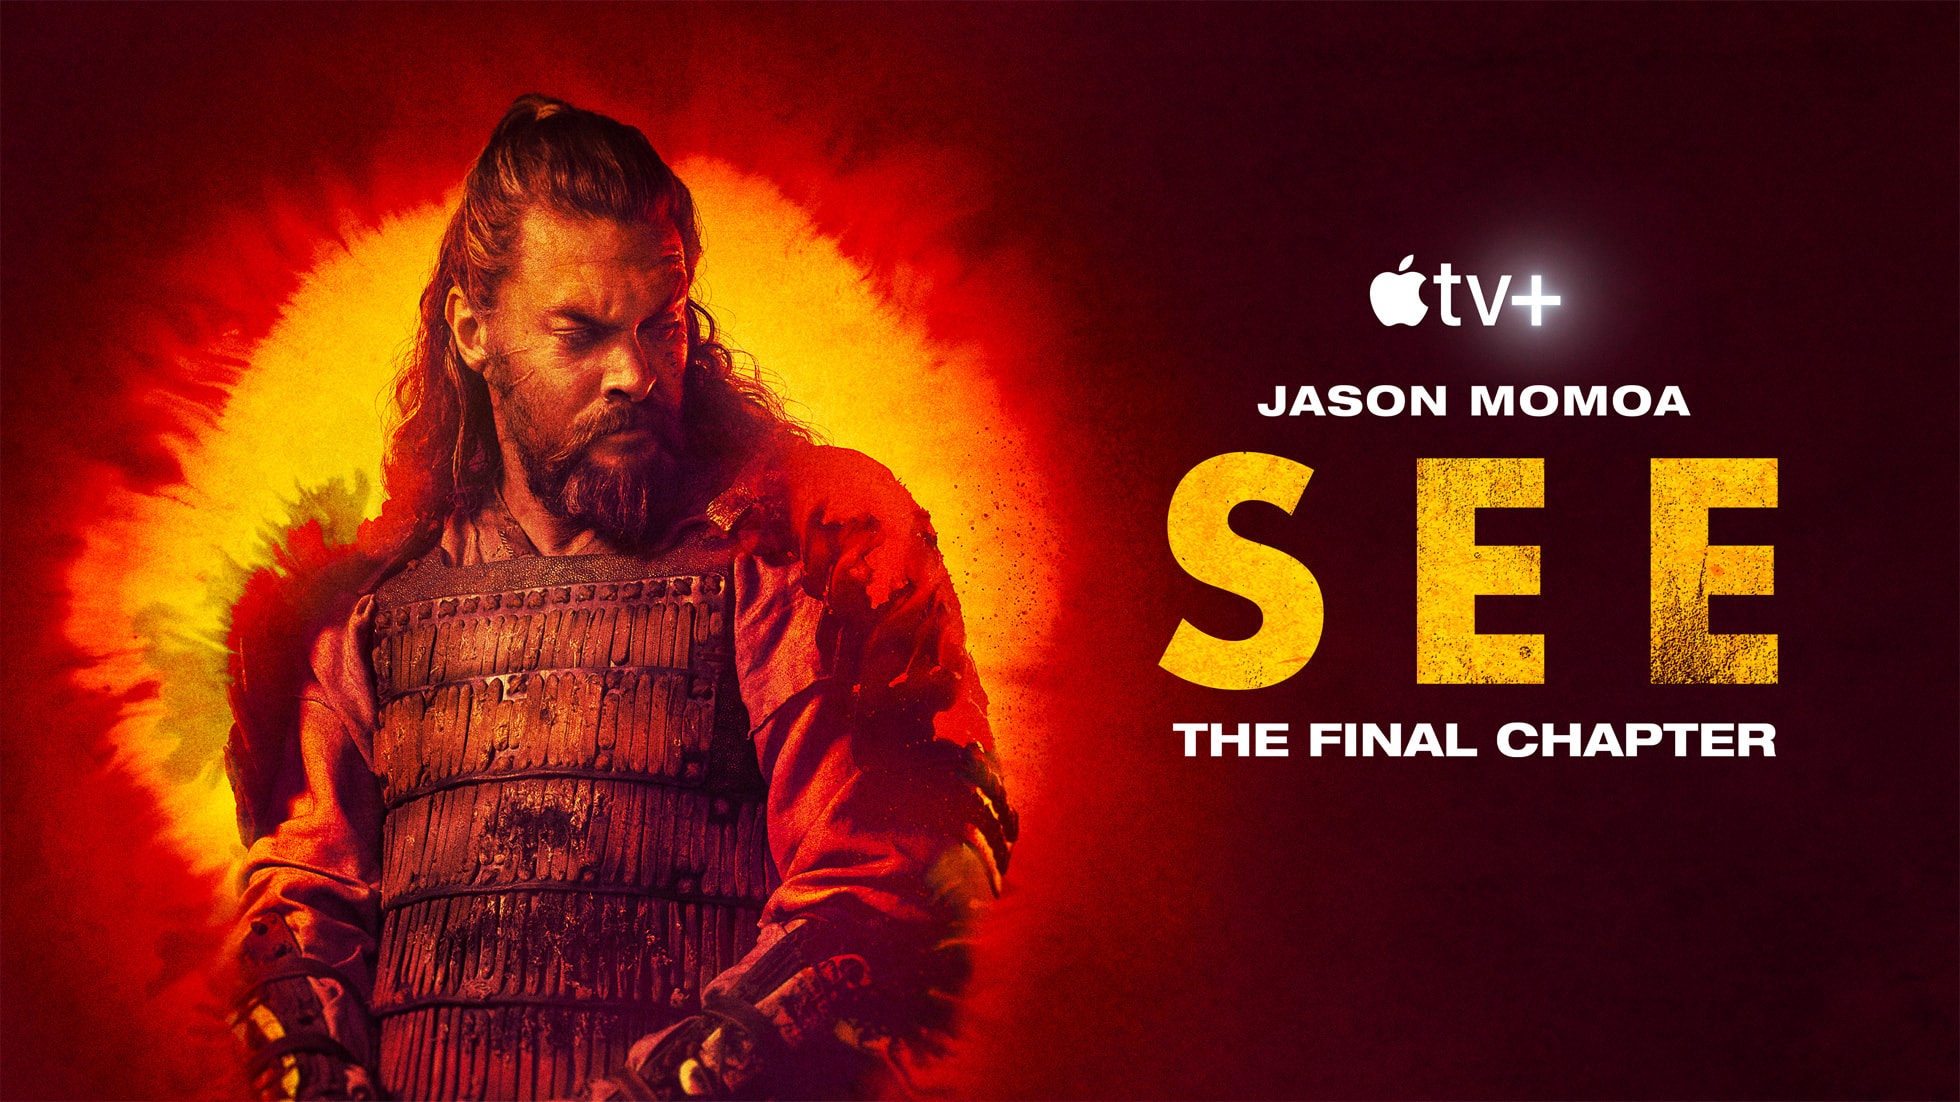 Trailer for third and final season of global hit Apple Original series “See,” starring Jason Momoa, unveiled at San Diego Comic-Con. The final chapter of the epic post-apocalyptic drama premieres Friday, August 26, 2022 on Apple TV+.